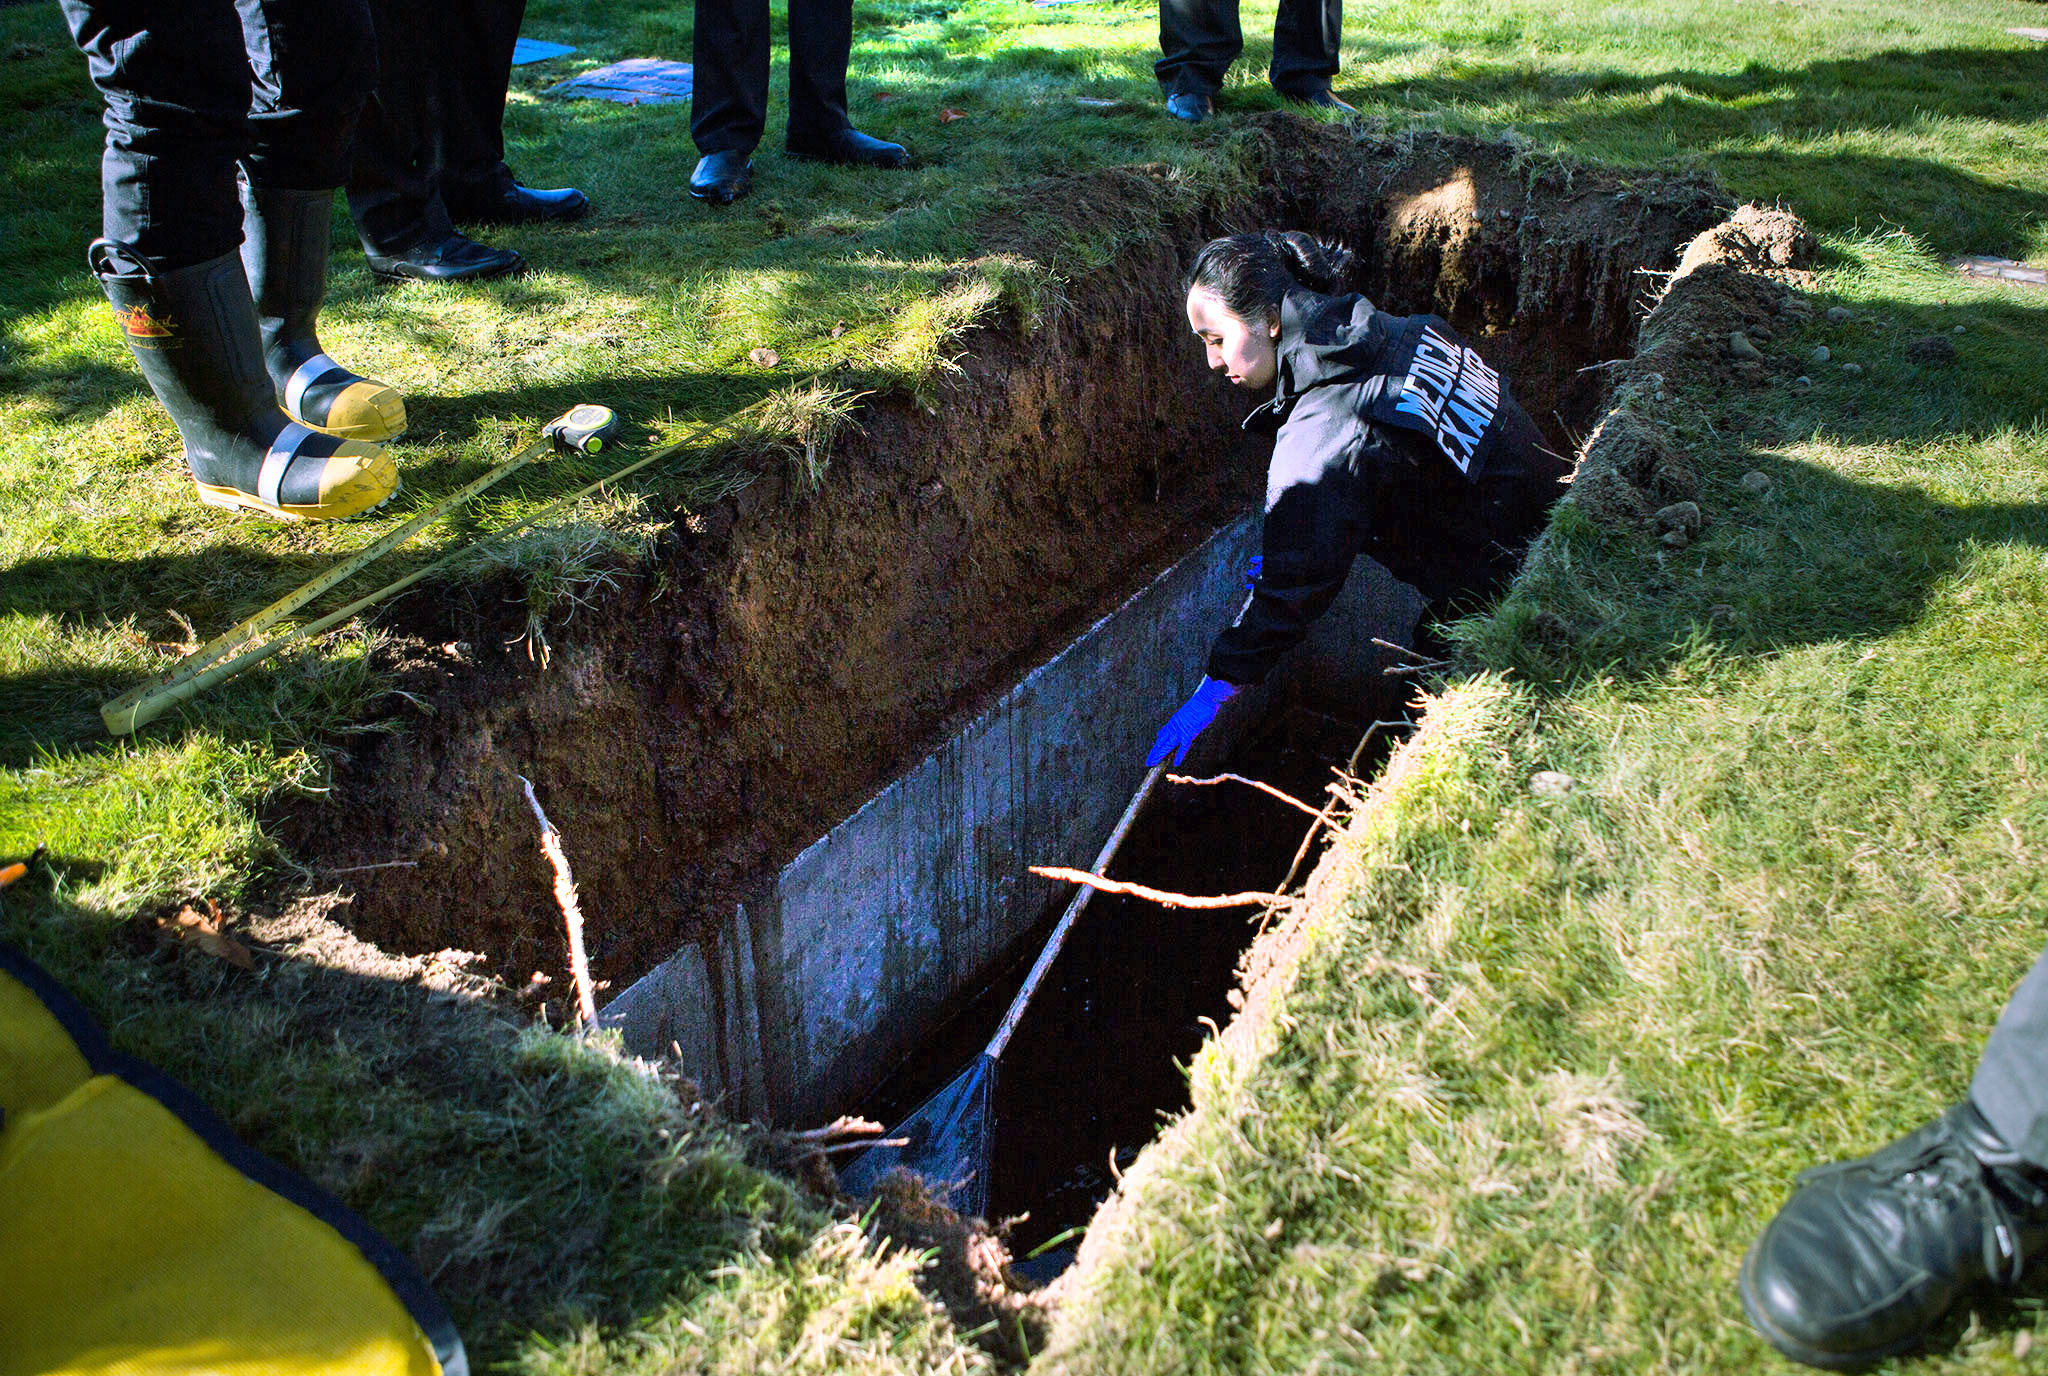 Lauren Higashino, a pathology assistant with the Snohomish County Medical Examiner’s Office, rakes through water for any left over remains during an exhumation at Cypress Lawn cemetery on Oct. 17, 2018 in Everett. (Olivia Vanni / The Herald)